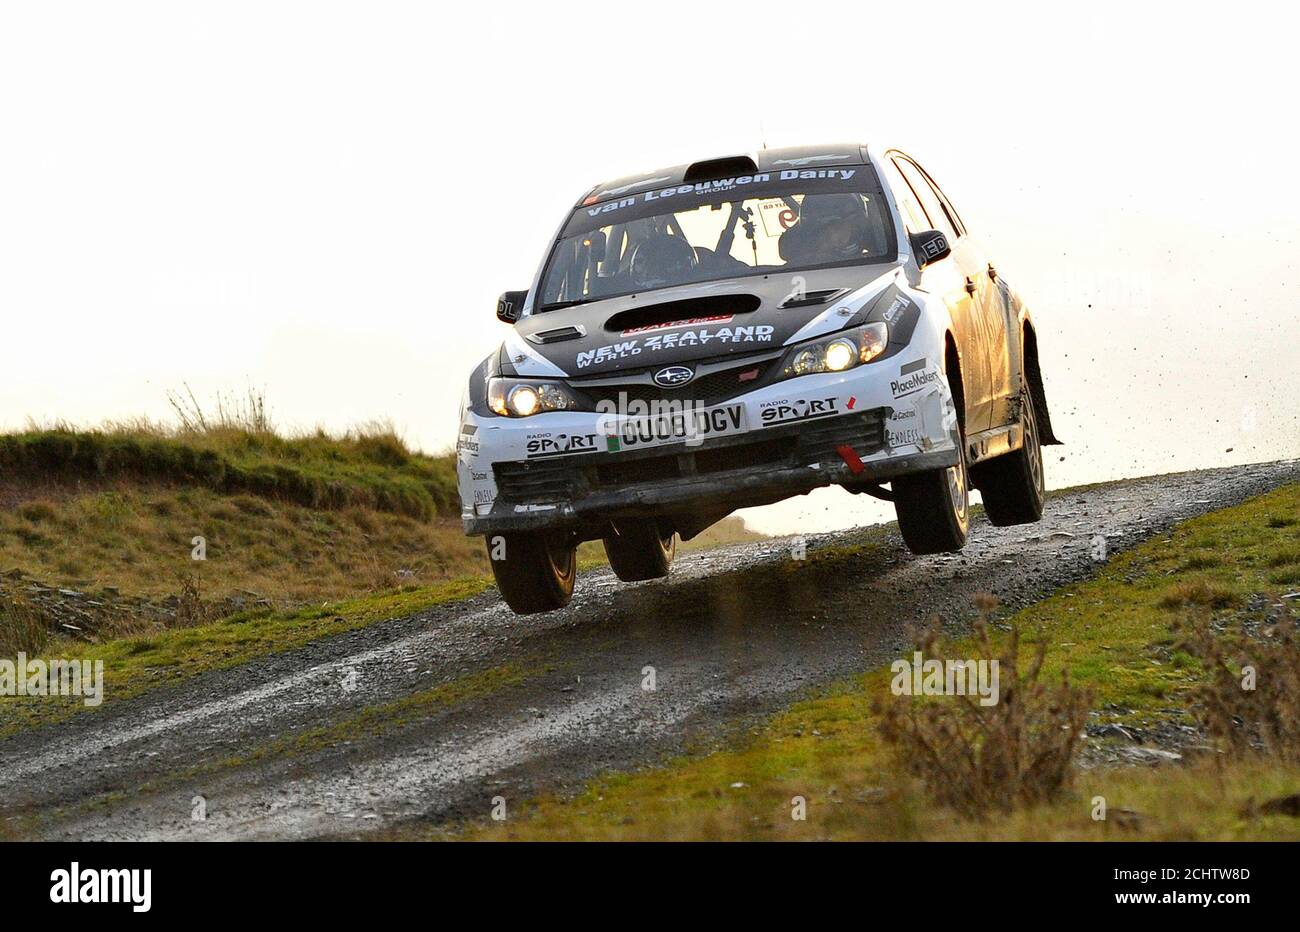 Hayden Paddon of New Zealand in his Subaru drives through a stage on the  Wales Rally motorsport rallying event near Brecon in south Wales November  13, 2011. REUTERS/Toby Melville (BRITAIN - Tags: